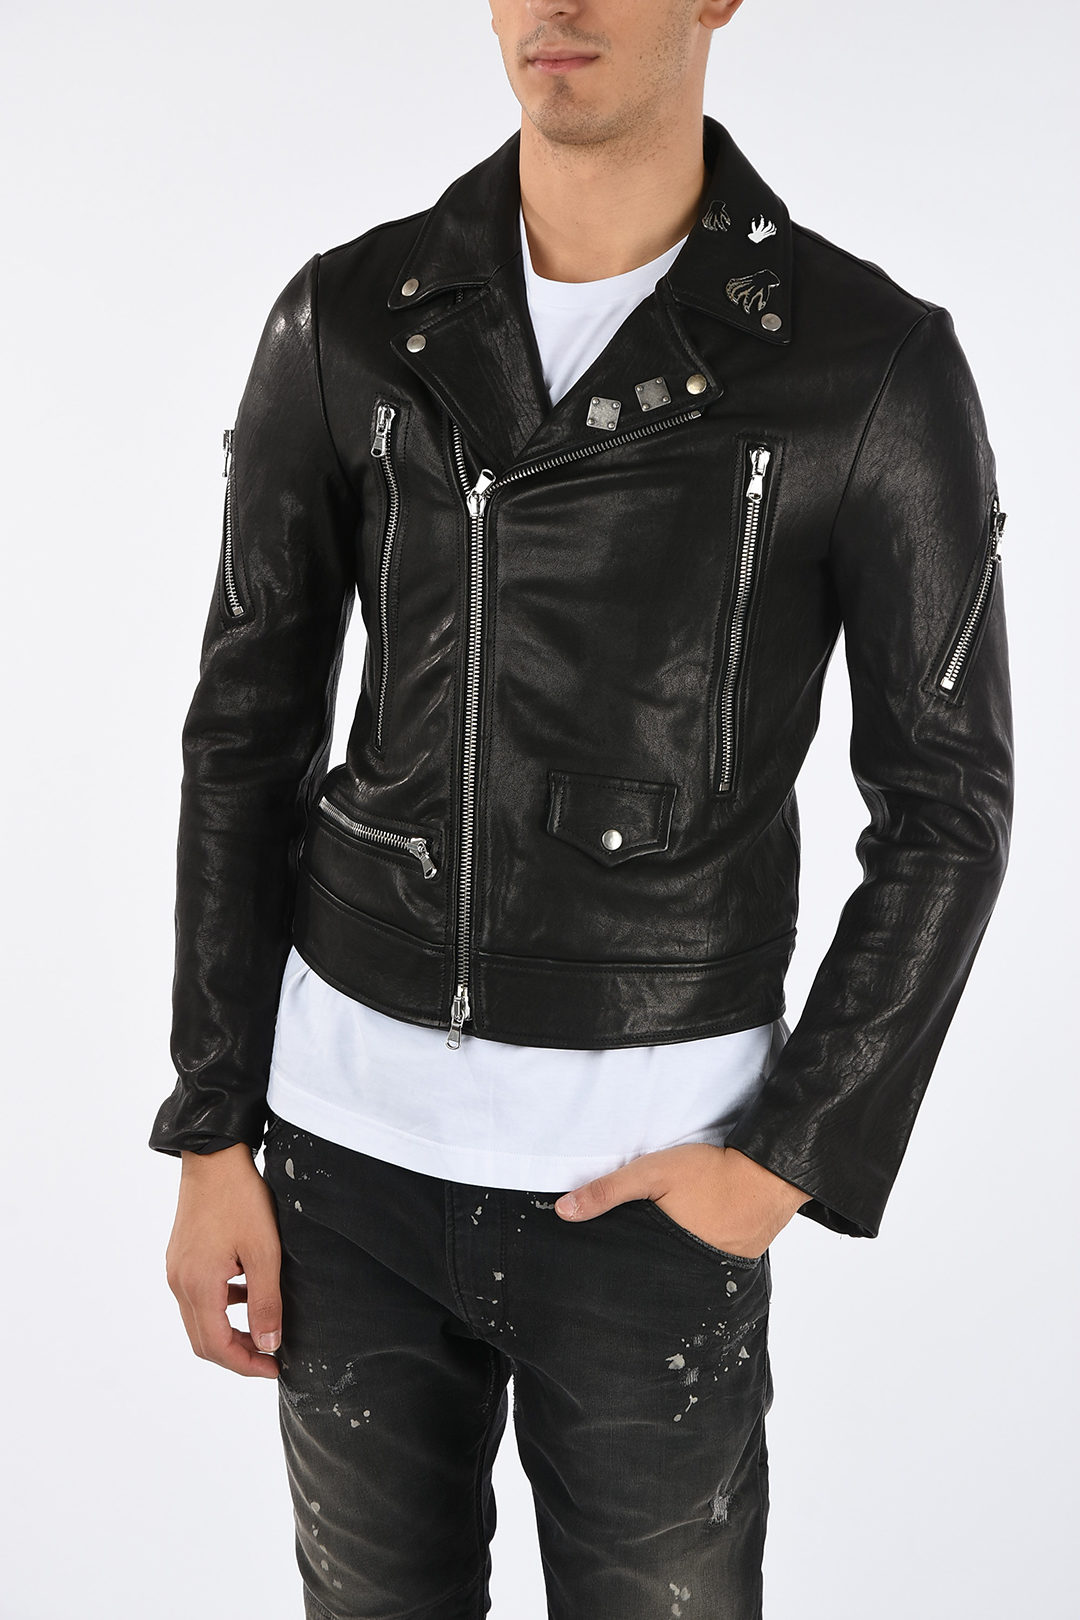 BLACK GOLD Leather L-PERF Jacket with Pins